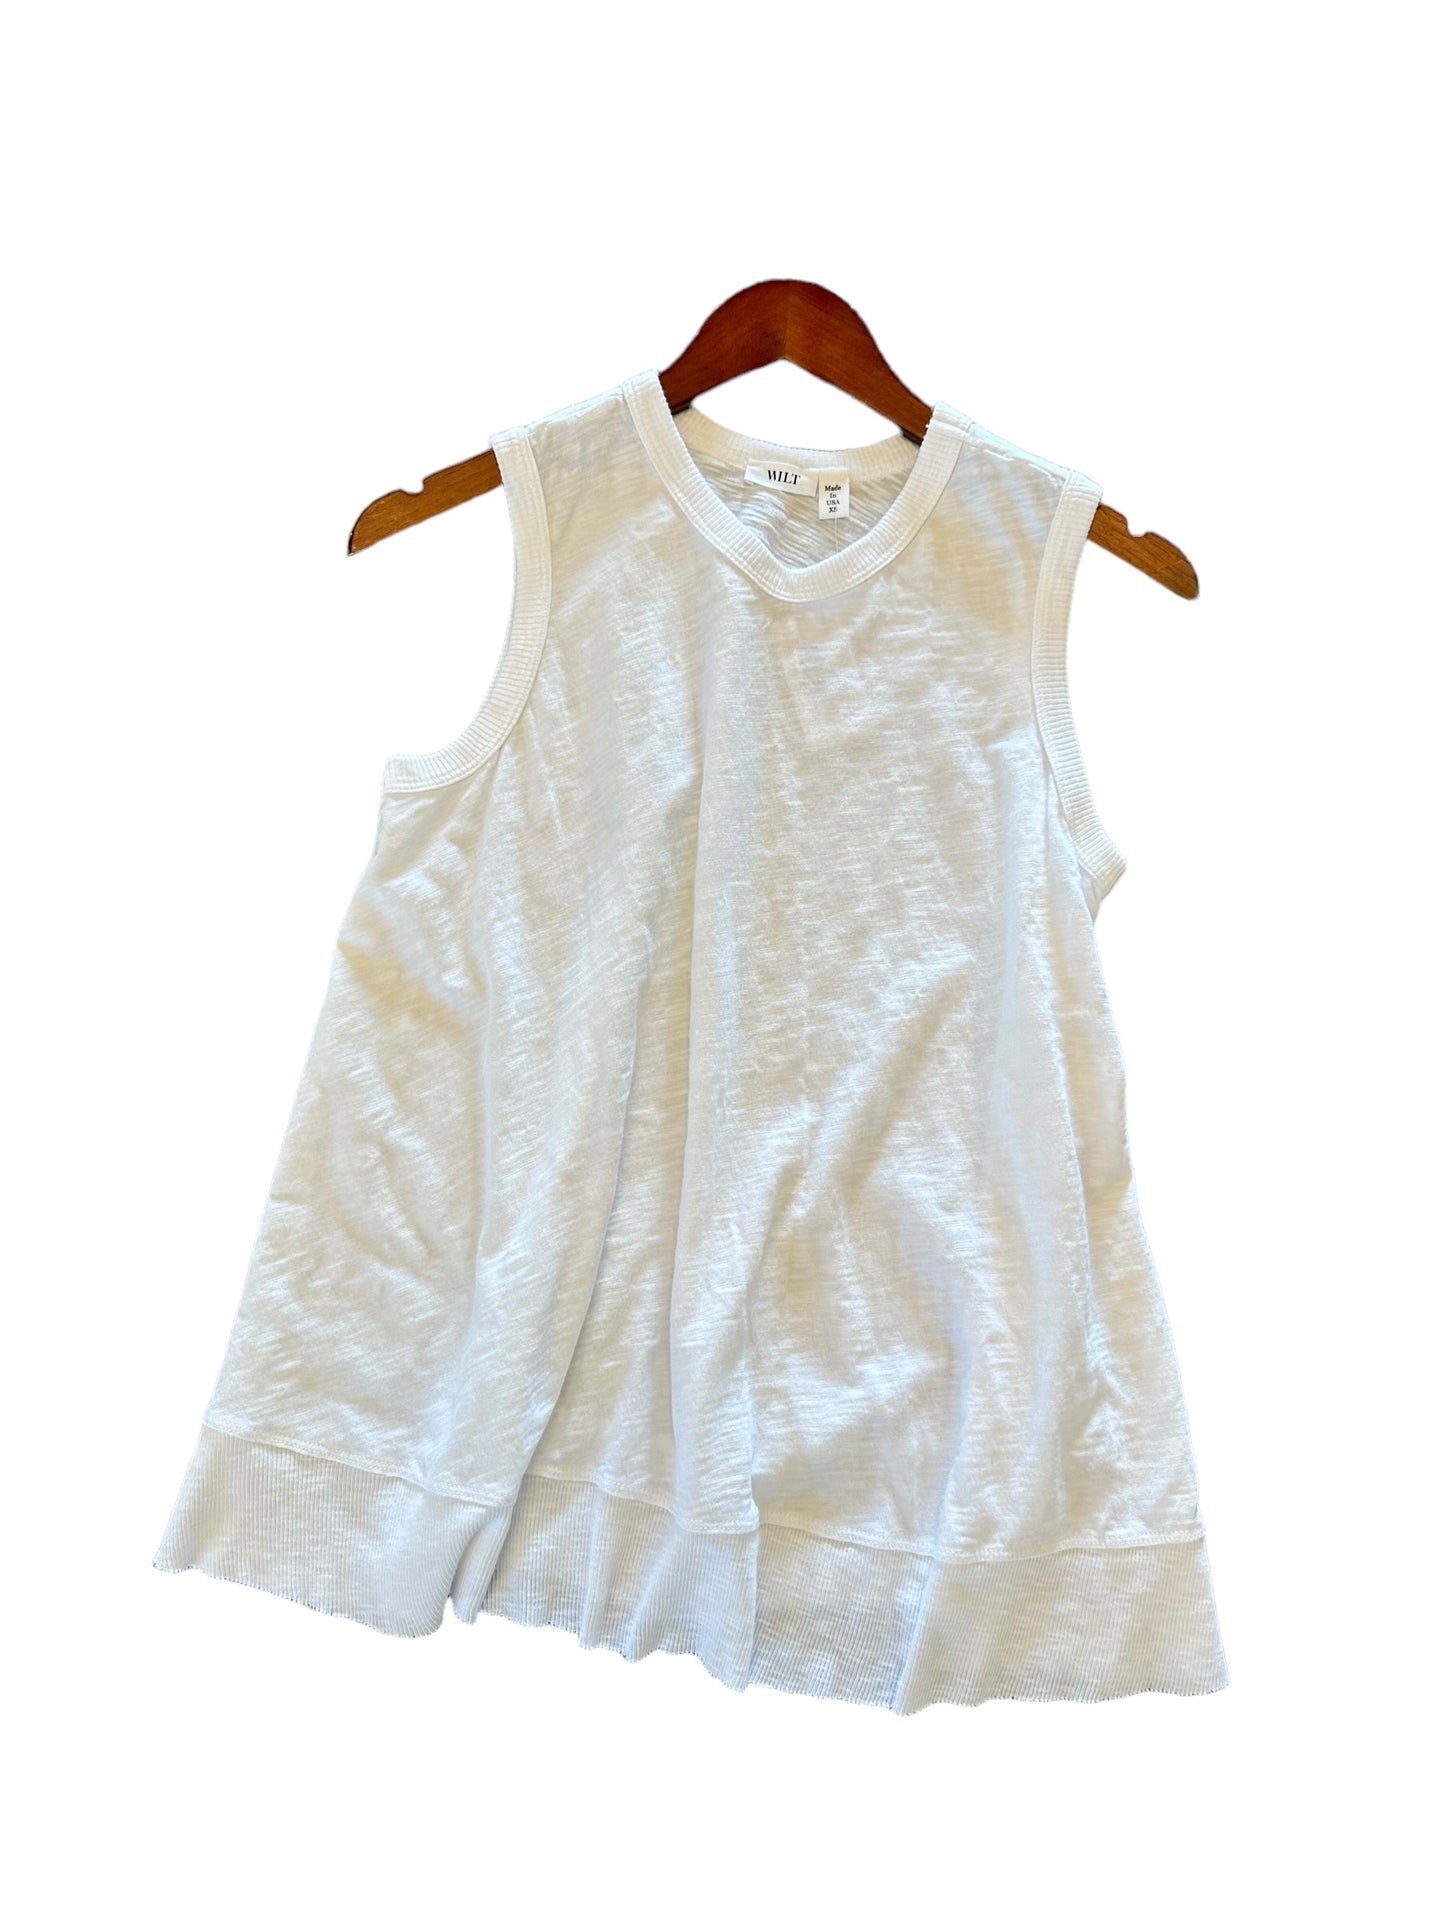 Crop Trapeze Shell Rib Mix Tee in white by Wilt